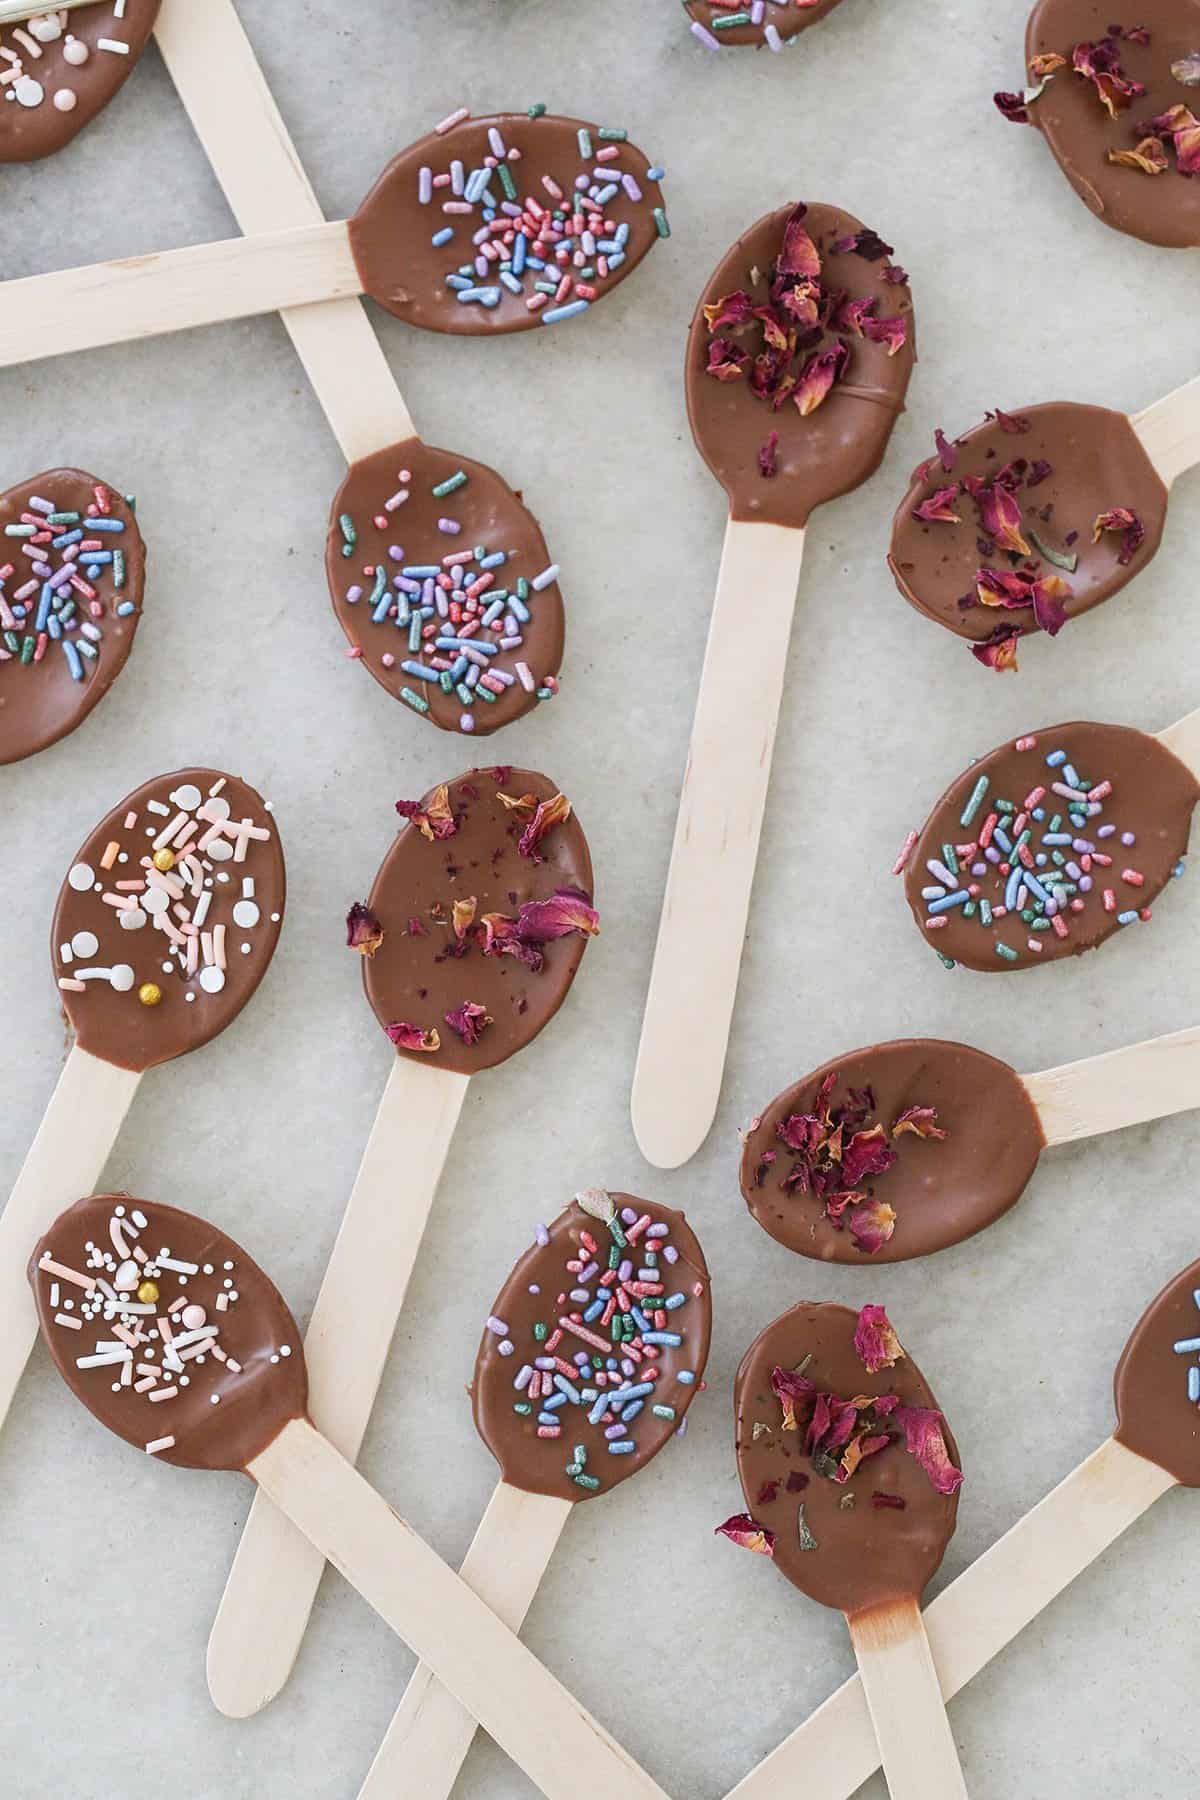 Chocolate-dipped spoons with sprinkles for ice cream.